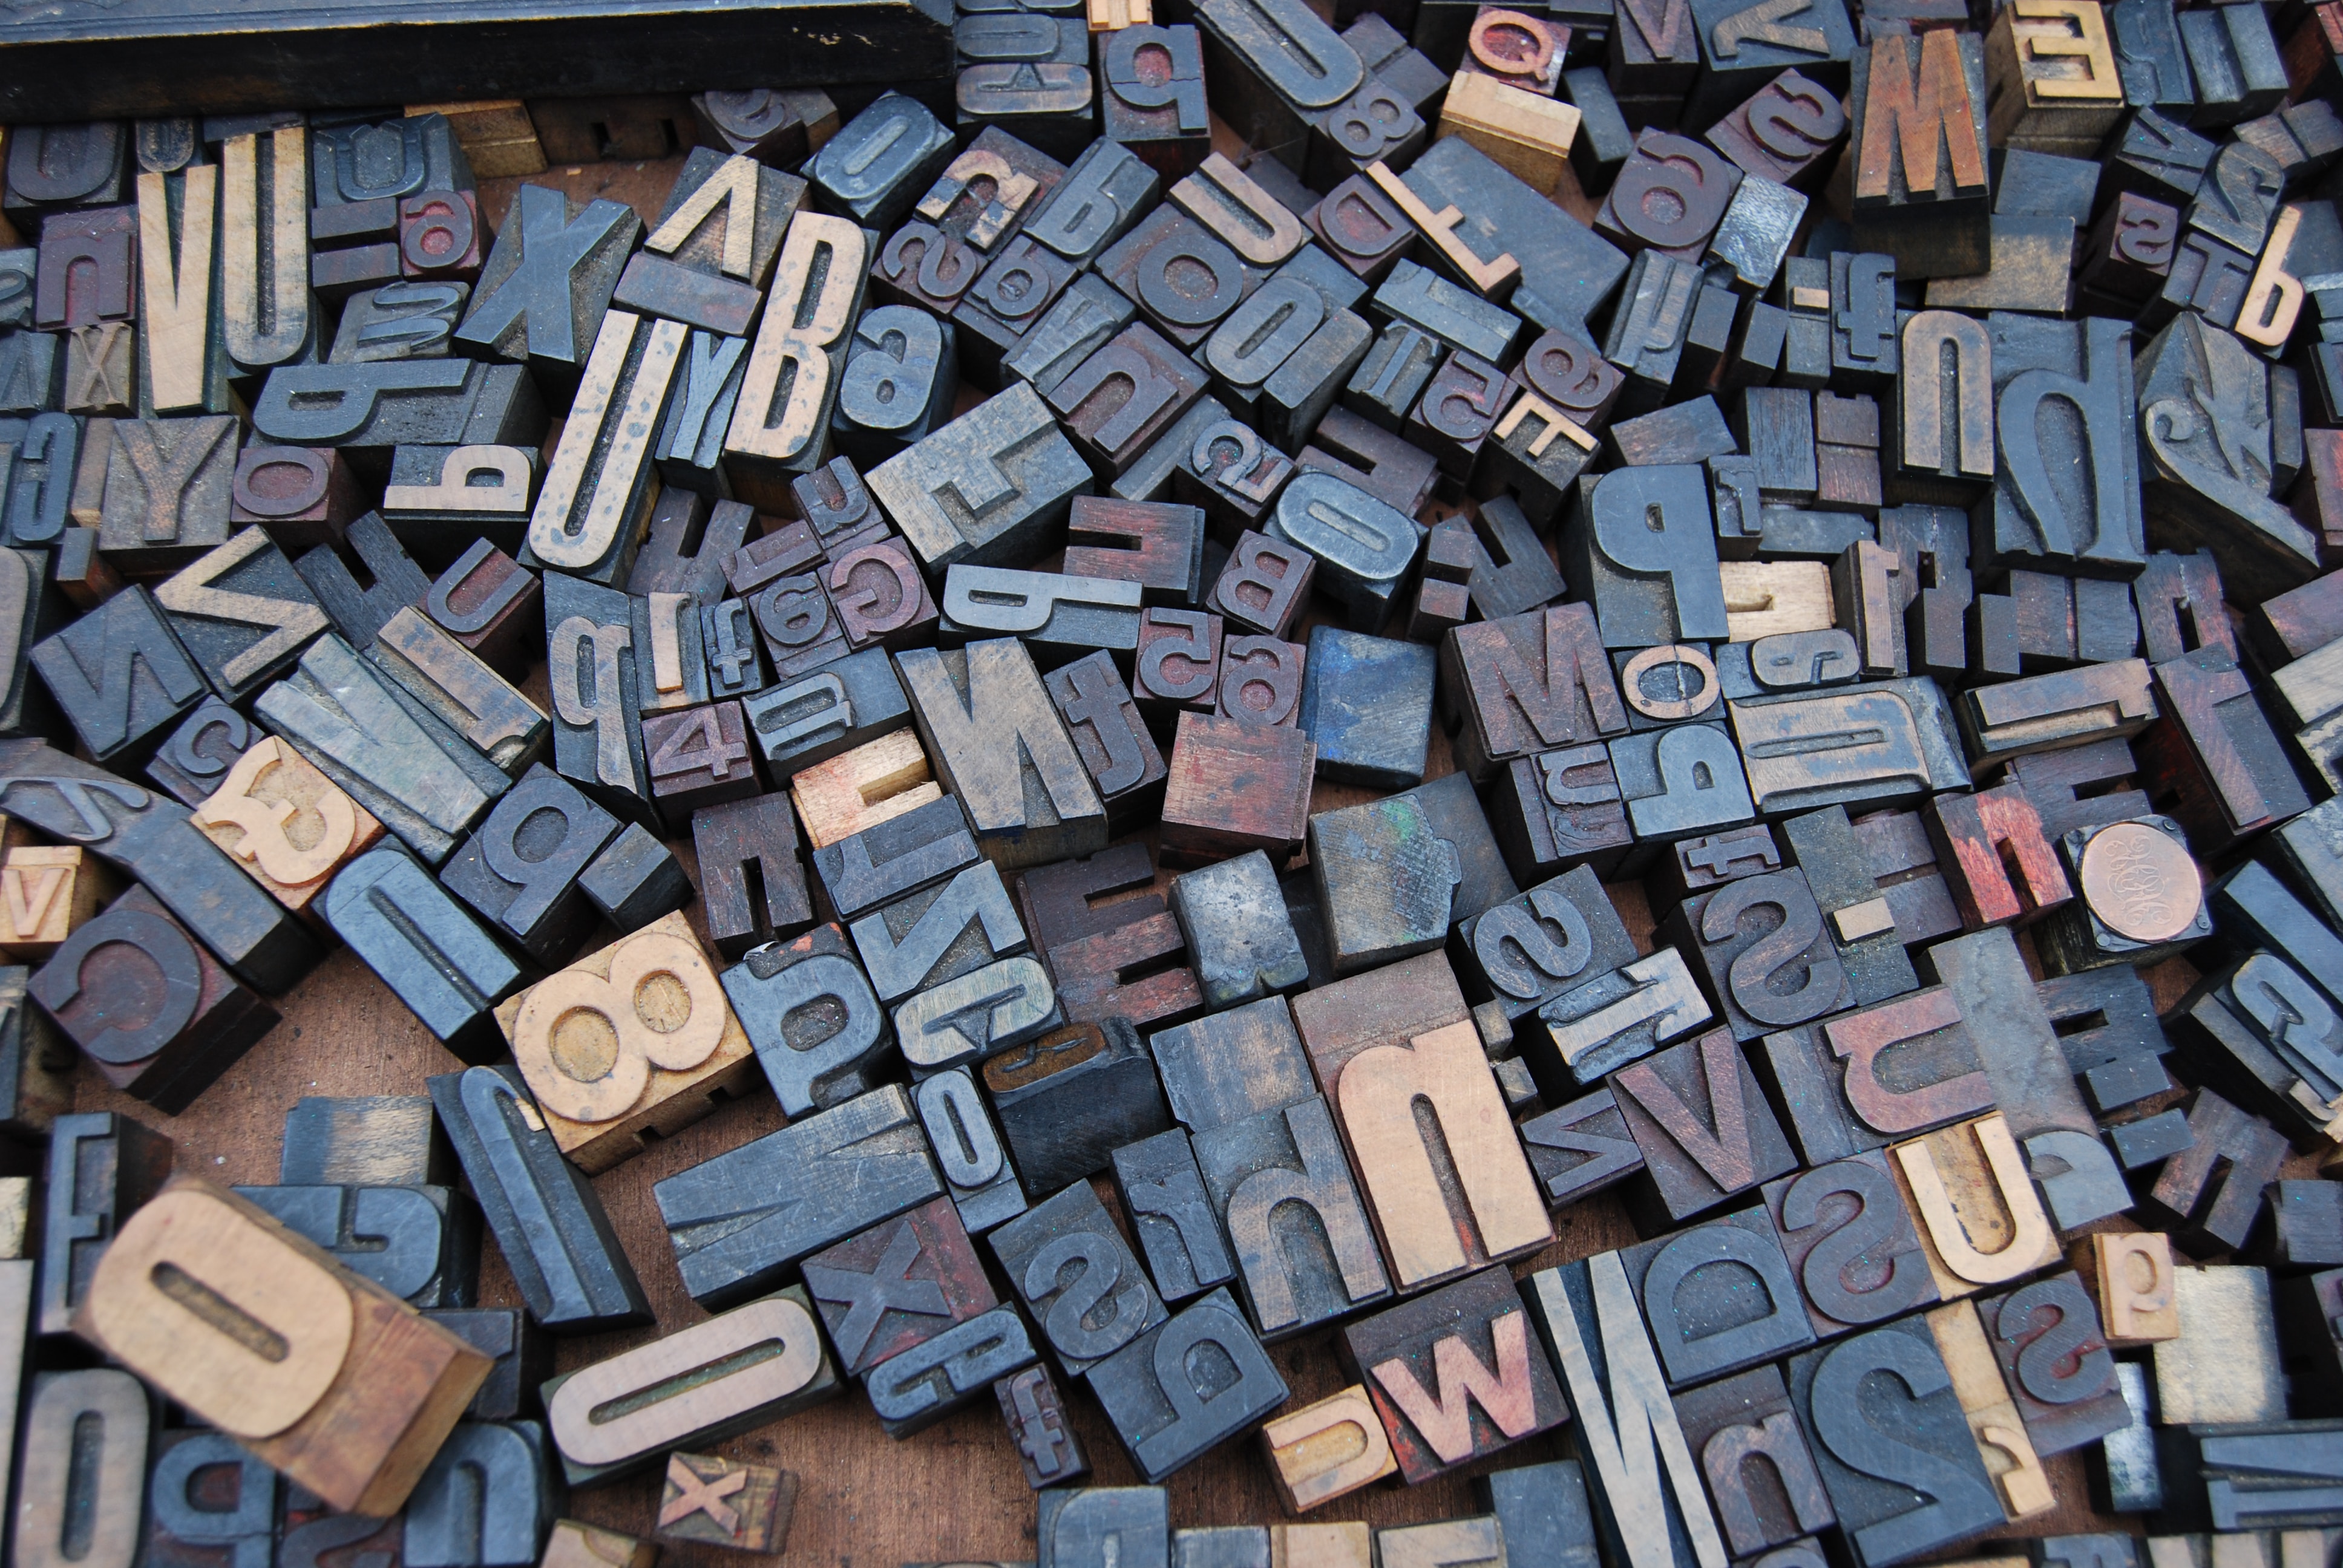 An assortment of letter stamps covered in ink